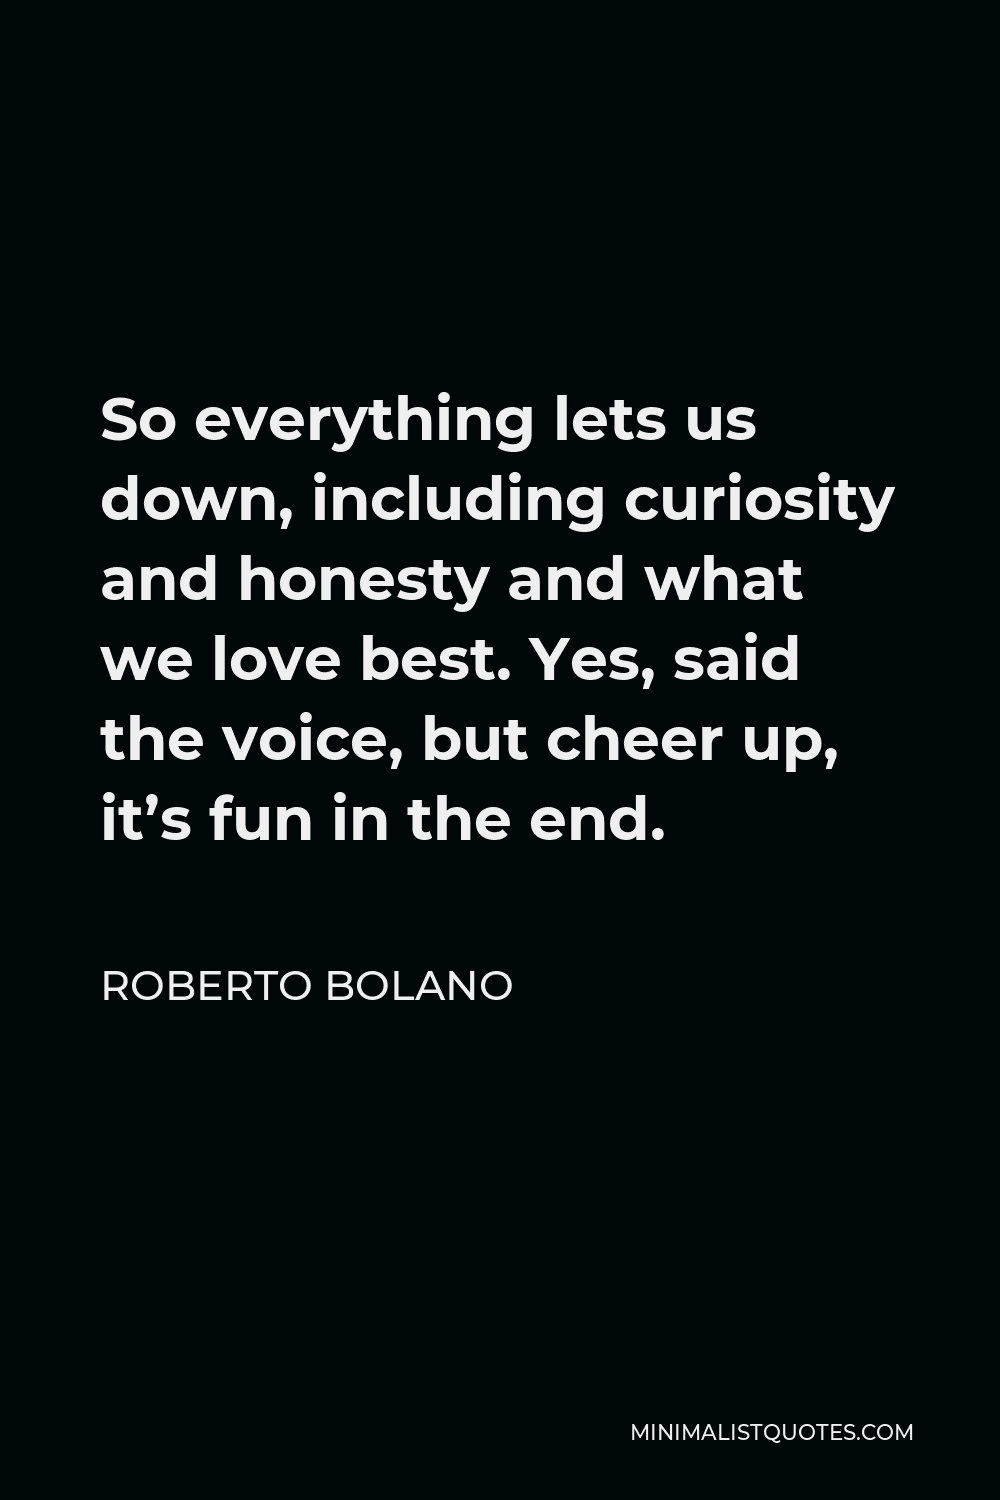 Roberto Bolano Quote - So everything lets us down, including curiosity and honesty and what we love best. Yes, said the voice, but cheer up, it’s fun in the end.